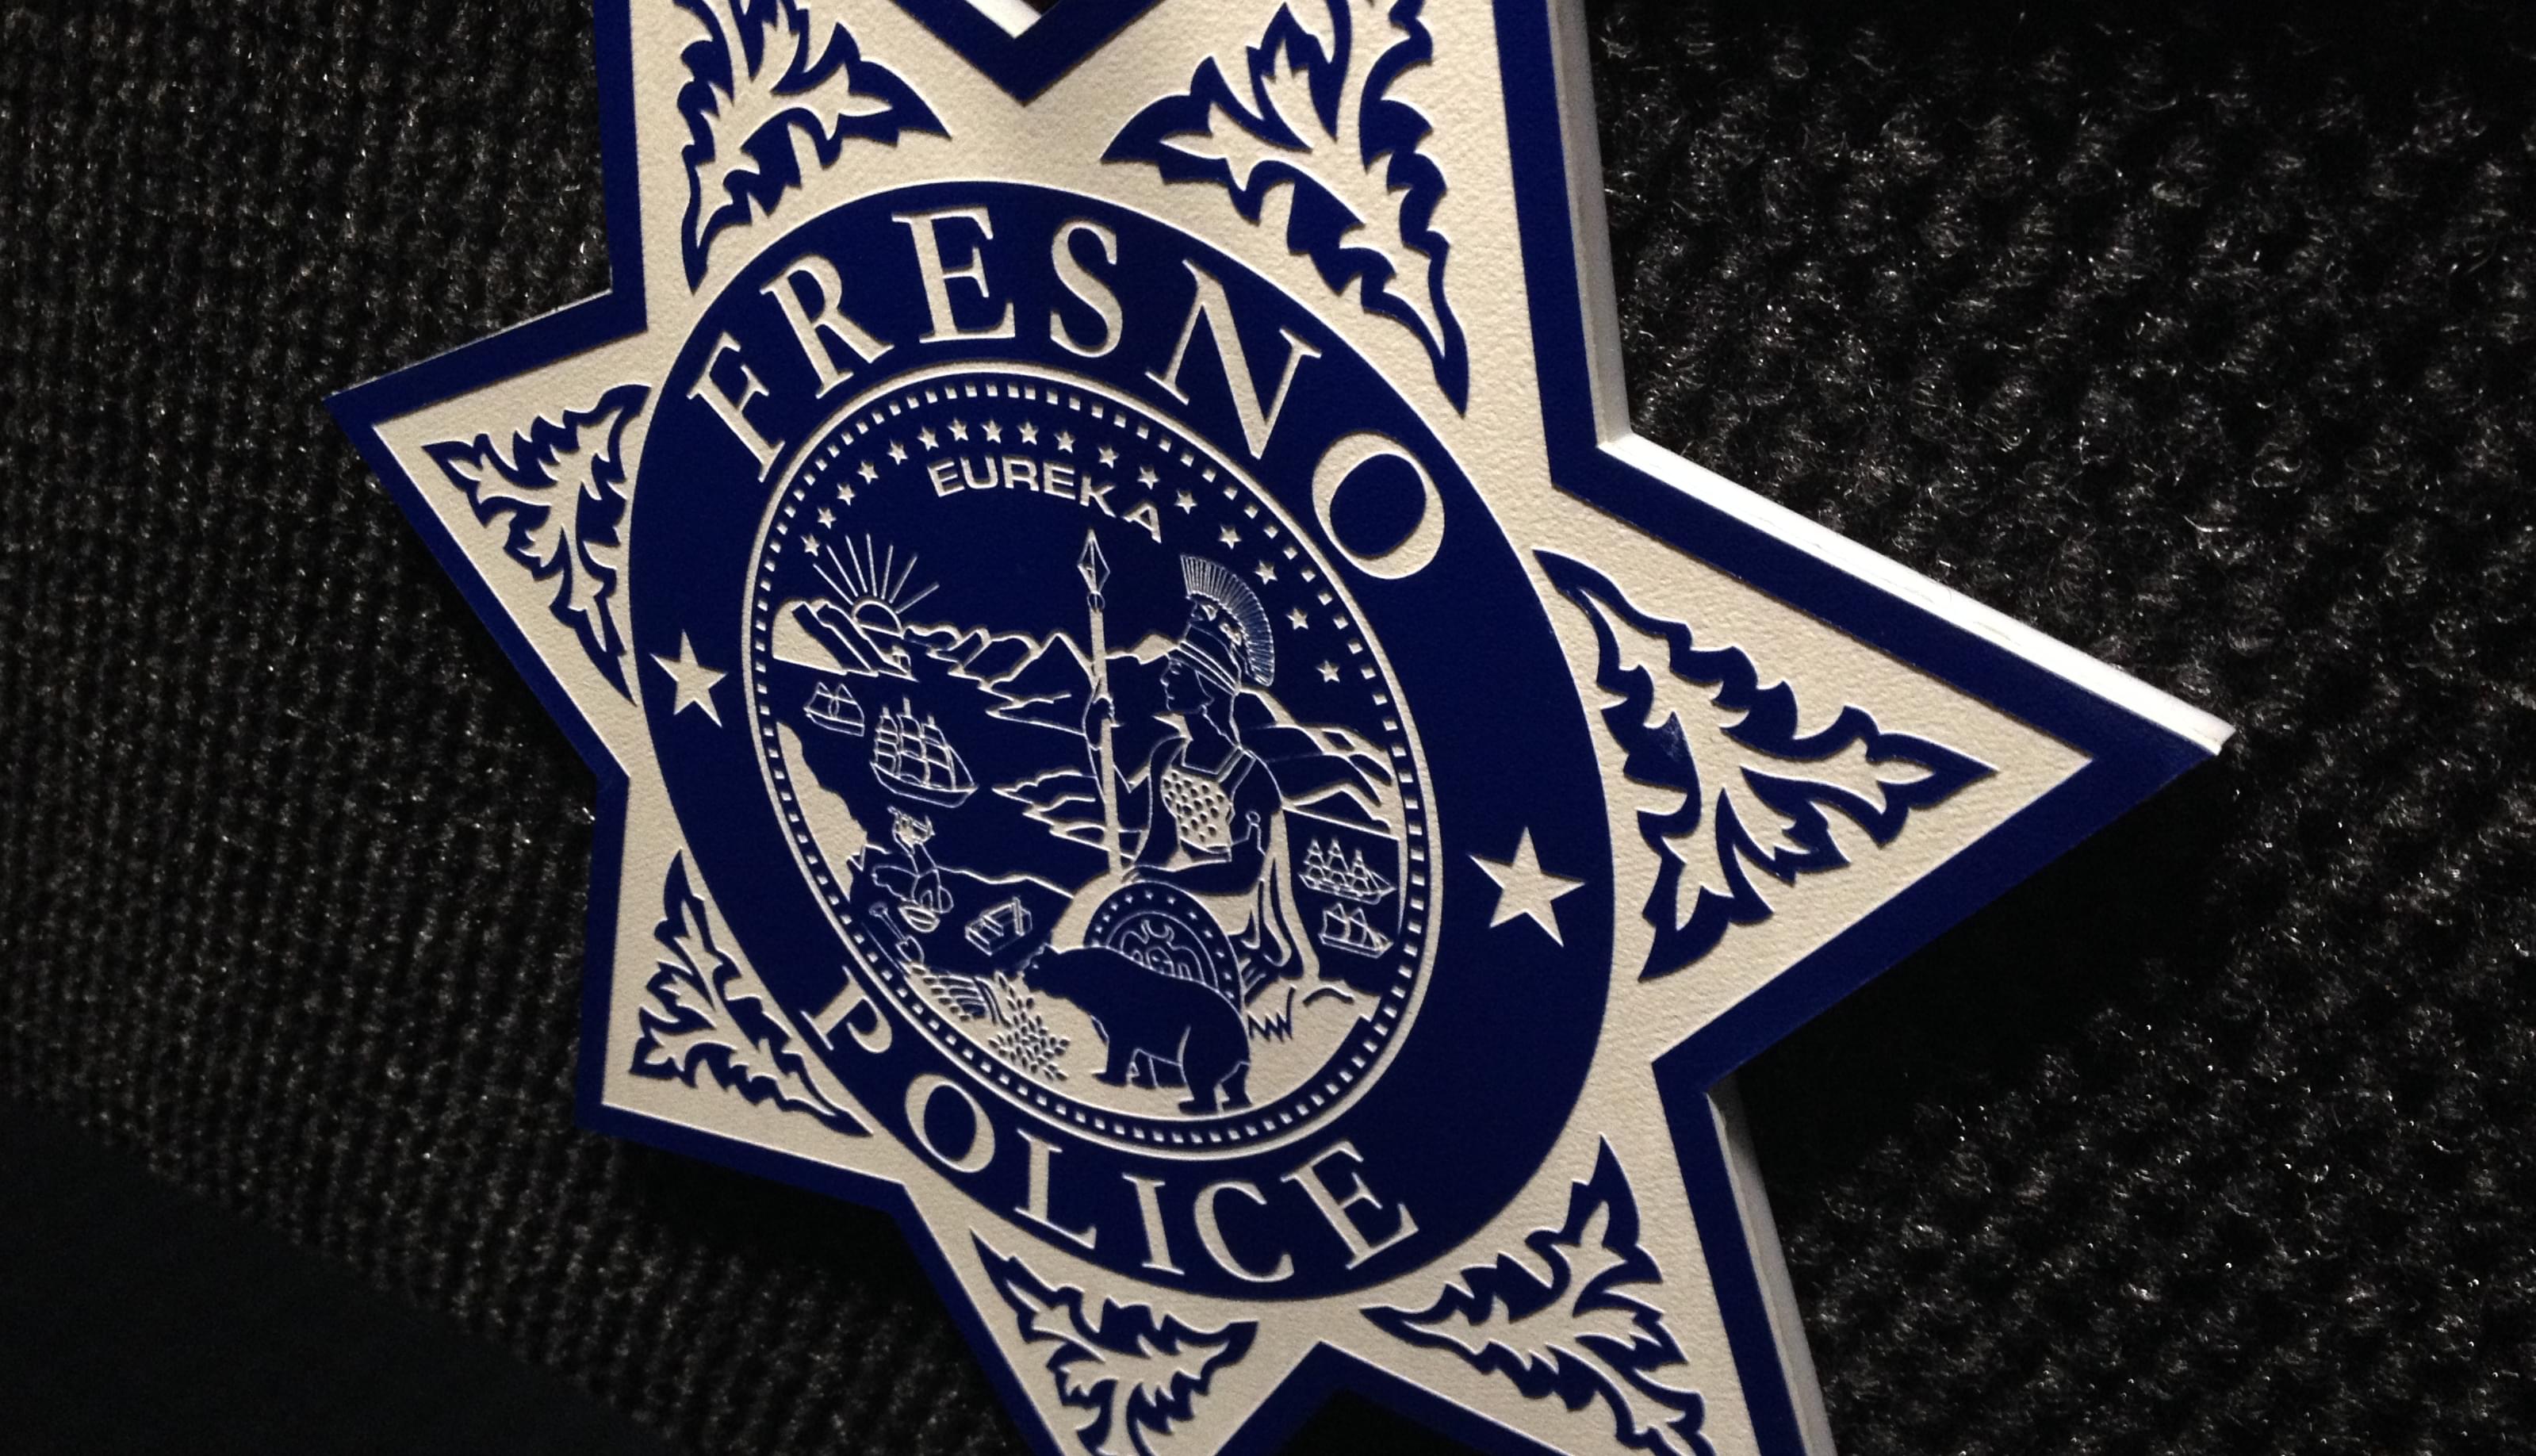 Your Opinion Wanted In Search For New Fresno Police Chief